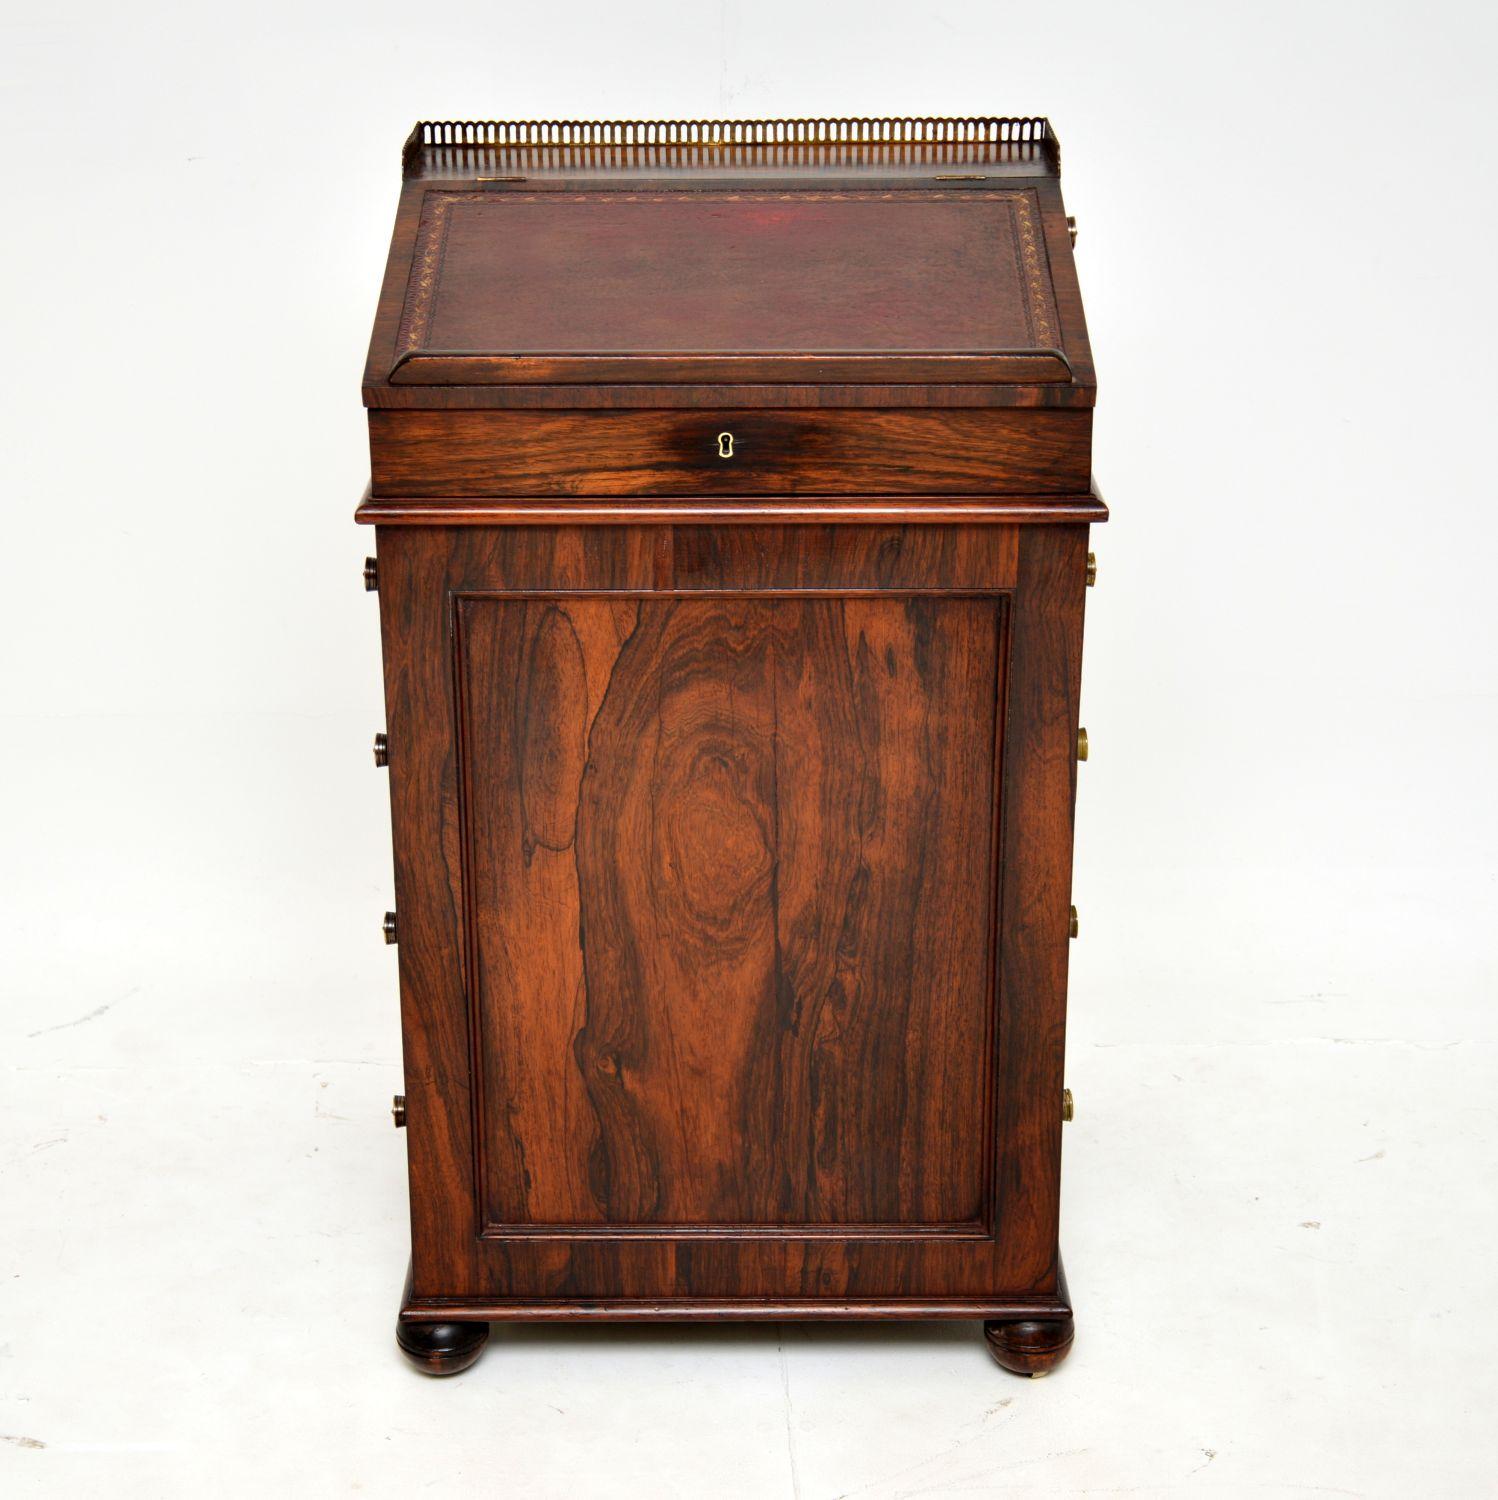 A fantastic antique William IV period Davenport of the highest order. This was made in Ireland between 1830-1840, it has an impressed makers stamp that reads “WOODS, DUBLIN”.

It is of amazing quality, beautifully made with many fine features. The